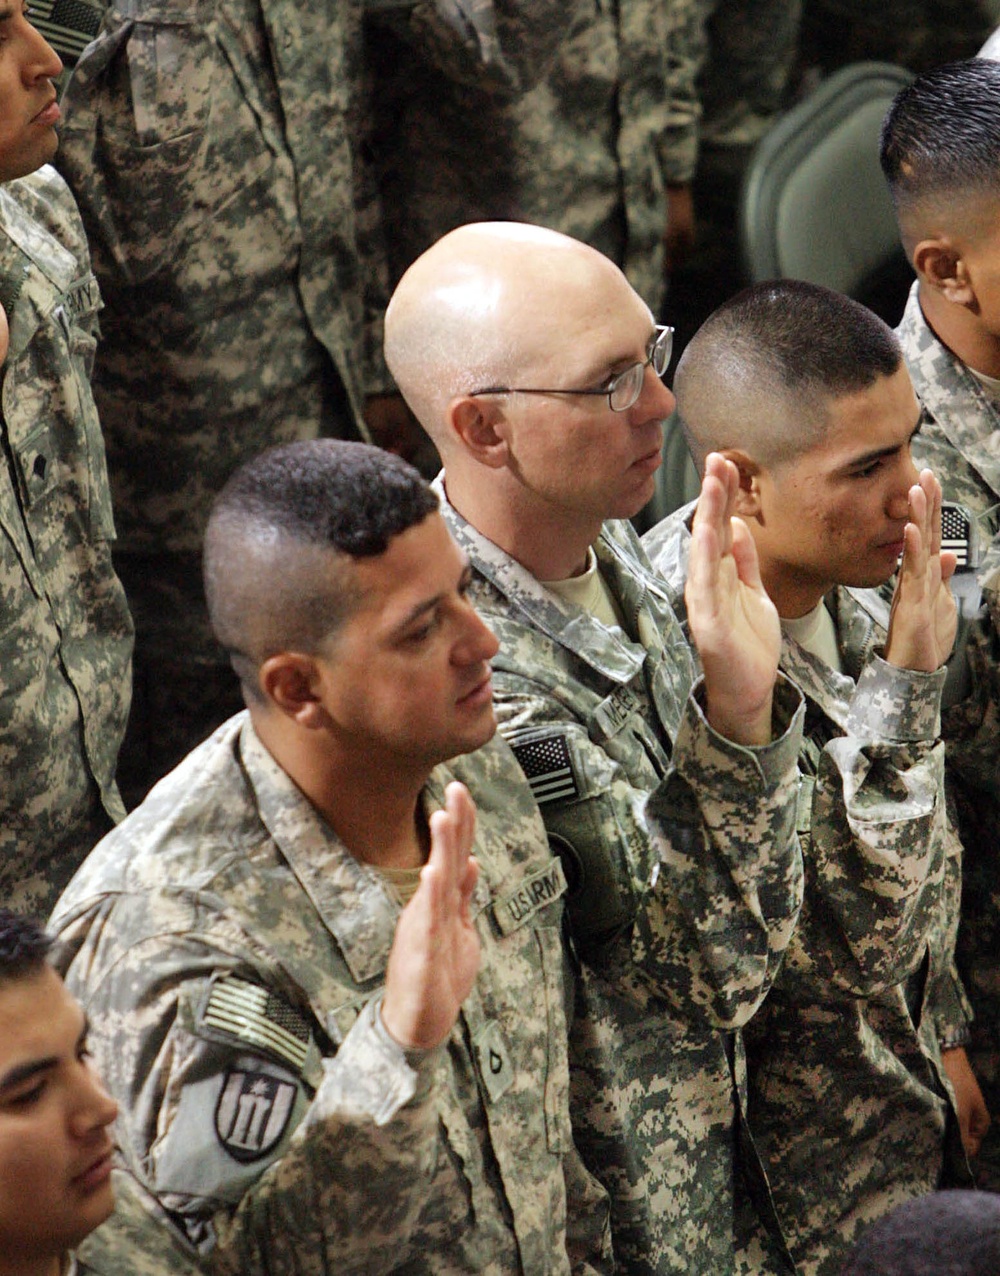 278th Soldiers become U.S. citizens